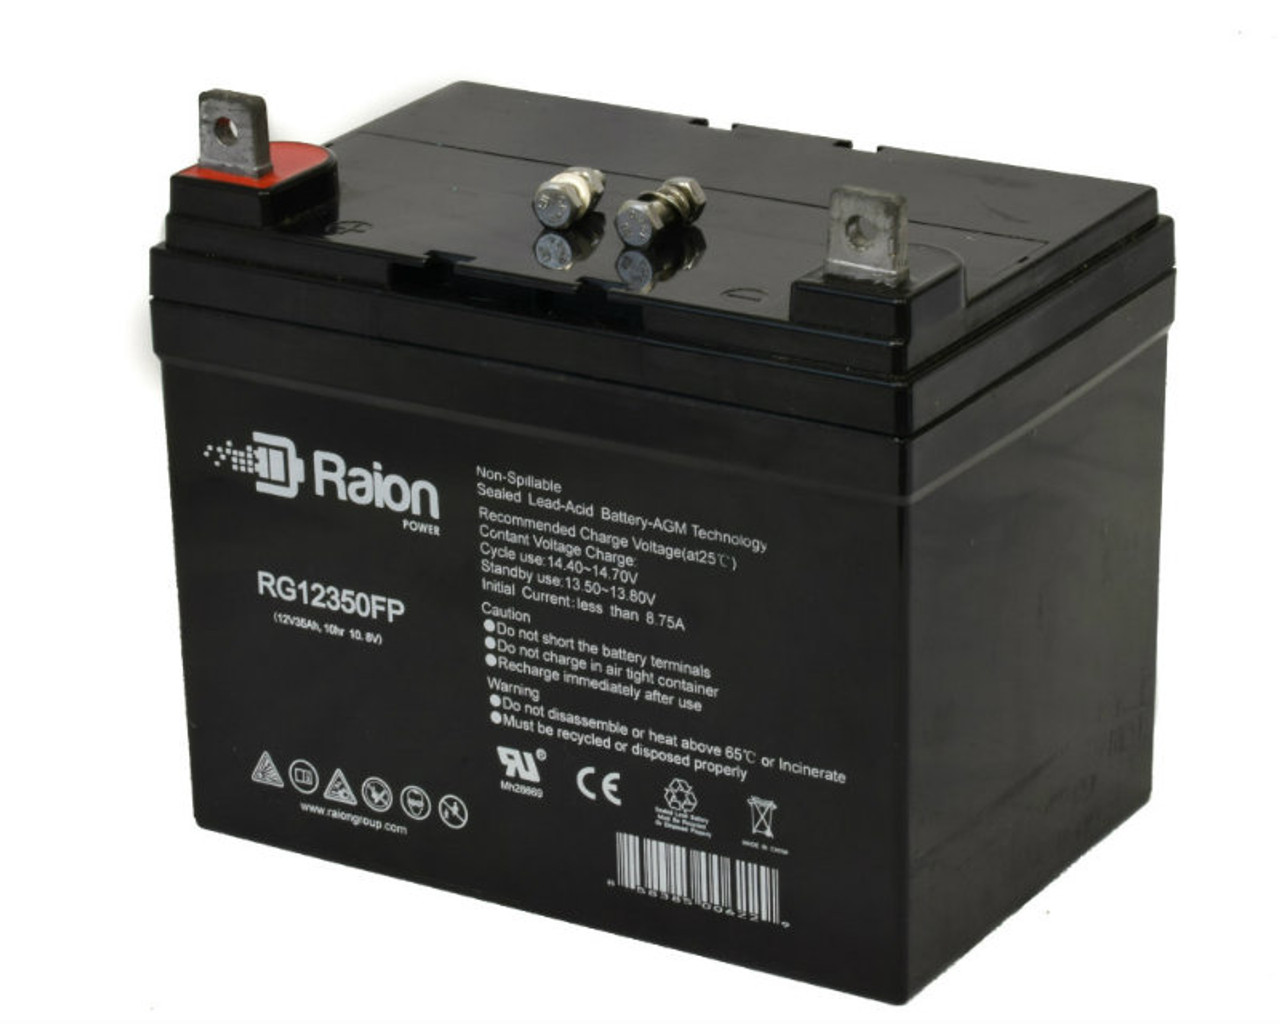 Raion Power Replacement 12V 35Ah Battery for Turfmaster 12/36 - 1 Pack